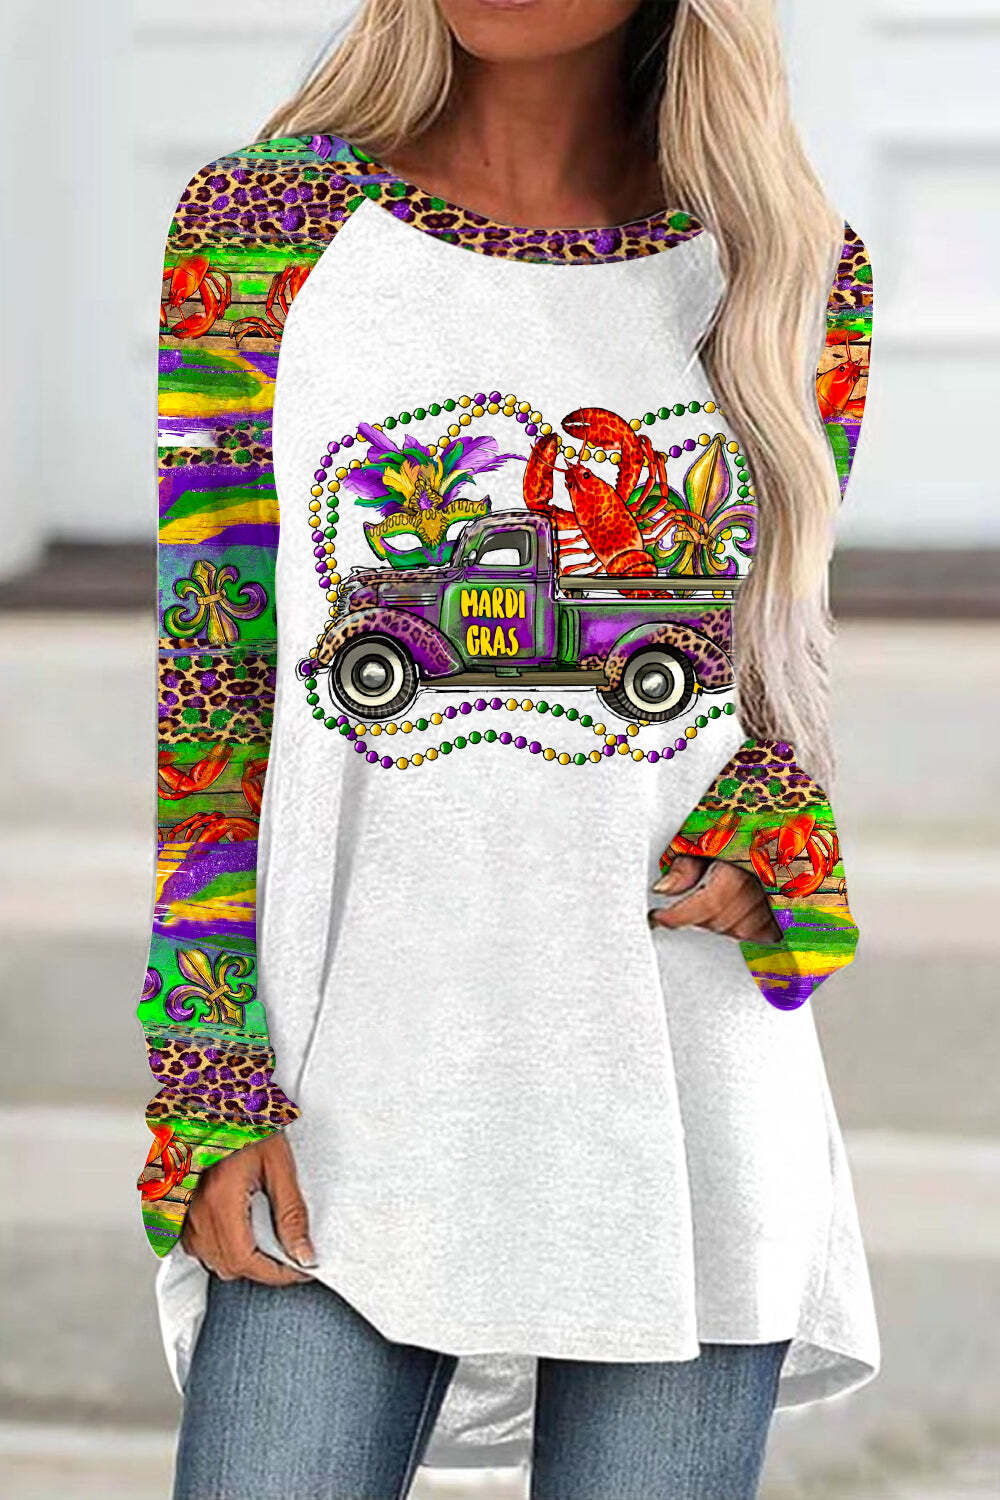 [CLEARANCE SALE]Mardi Gras Truck With Mask Fleur De Lis And Crawfish Western Leopard Print Tunic